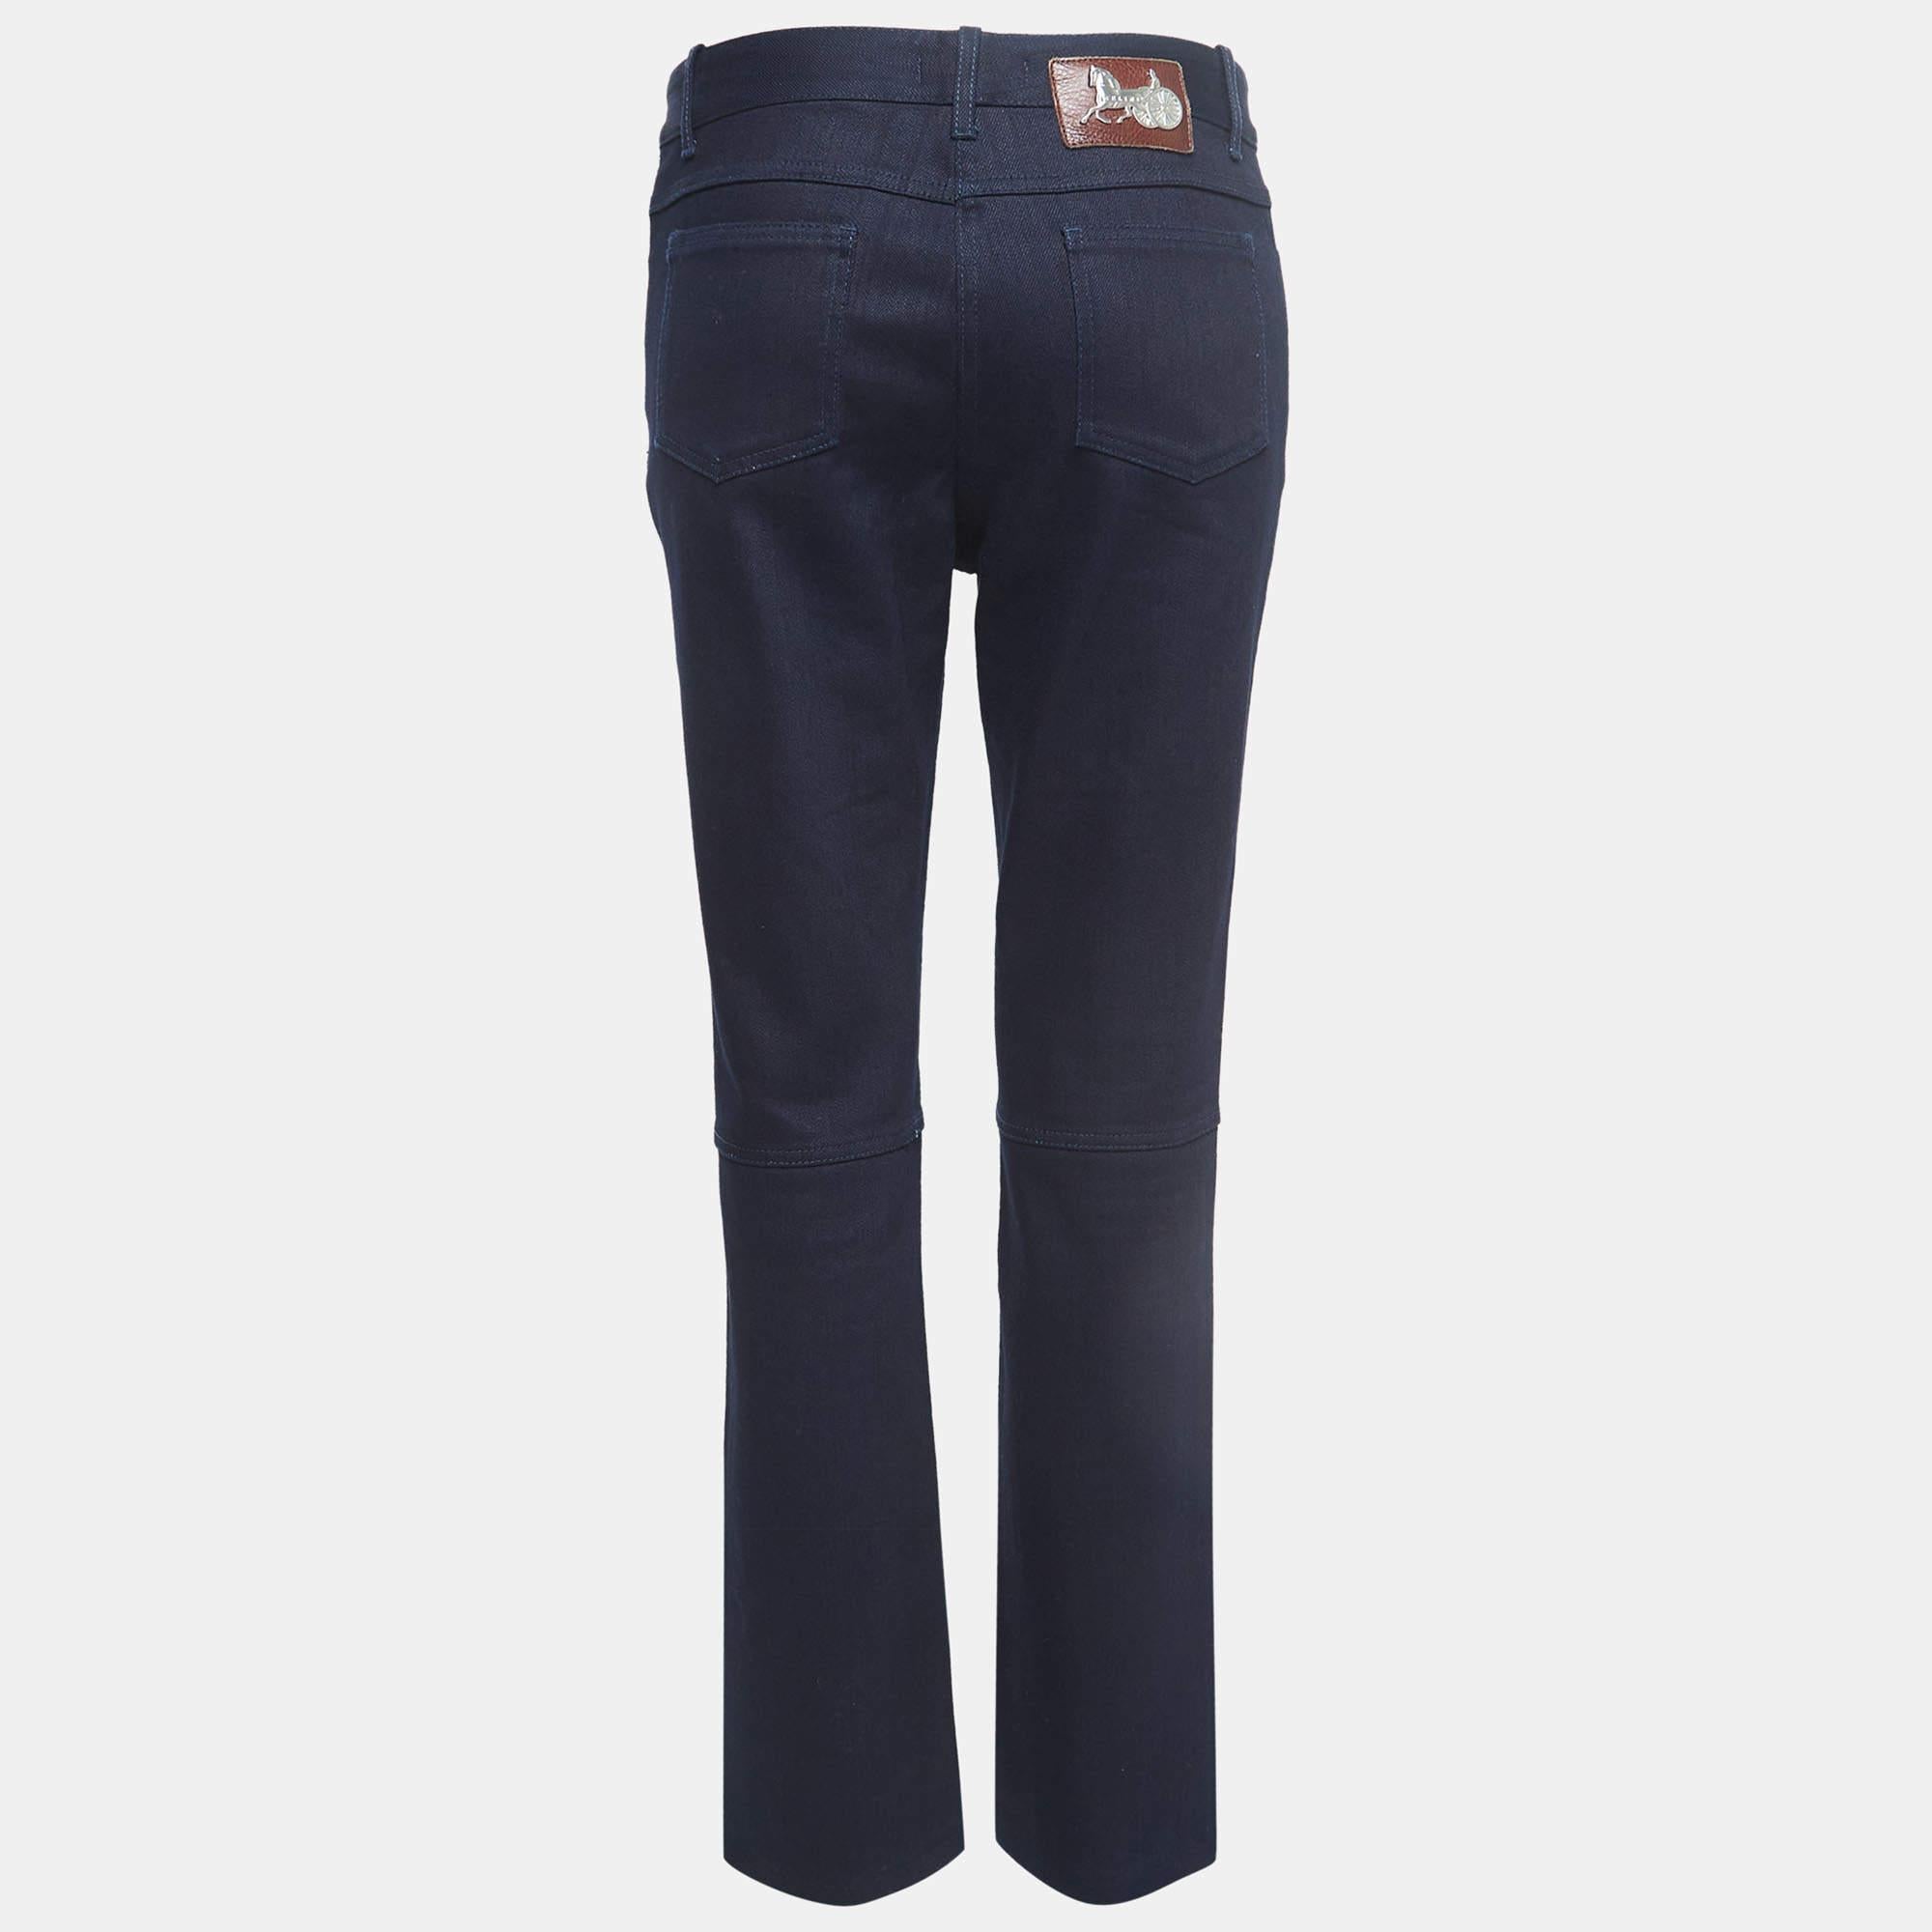 These Celine jeans are a must-have wardrobe essential. These navy blue jeans can be dressed both up and down for looks that are either casual and comfy or chic and fashionable.

